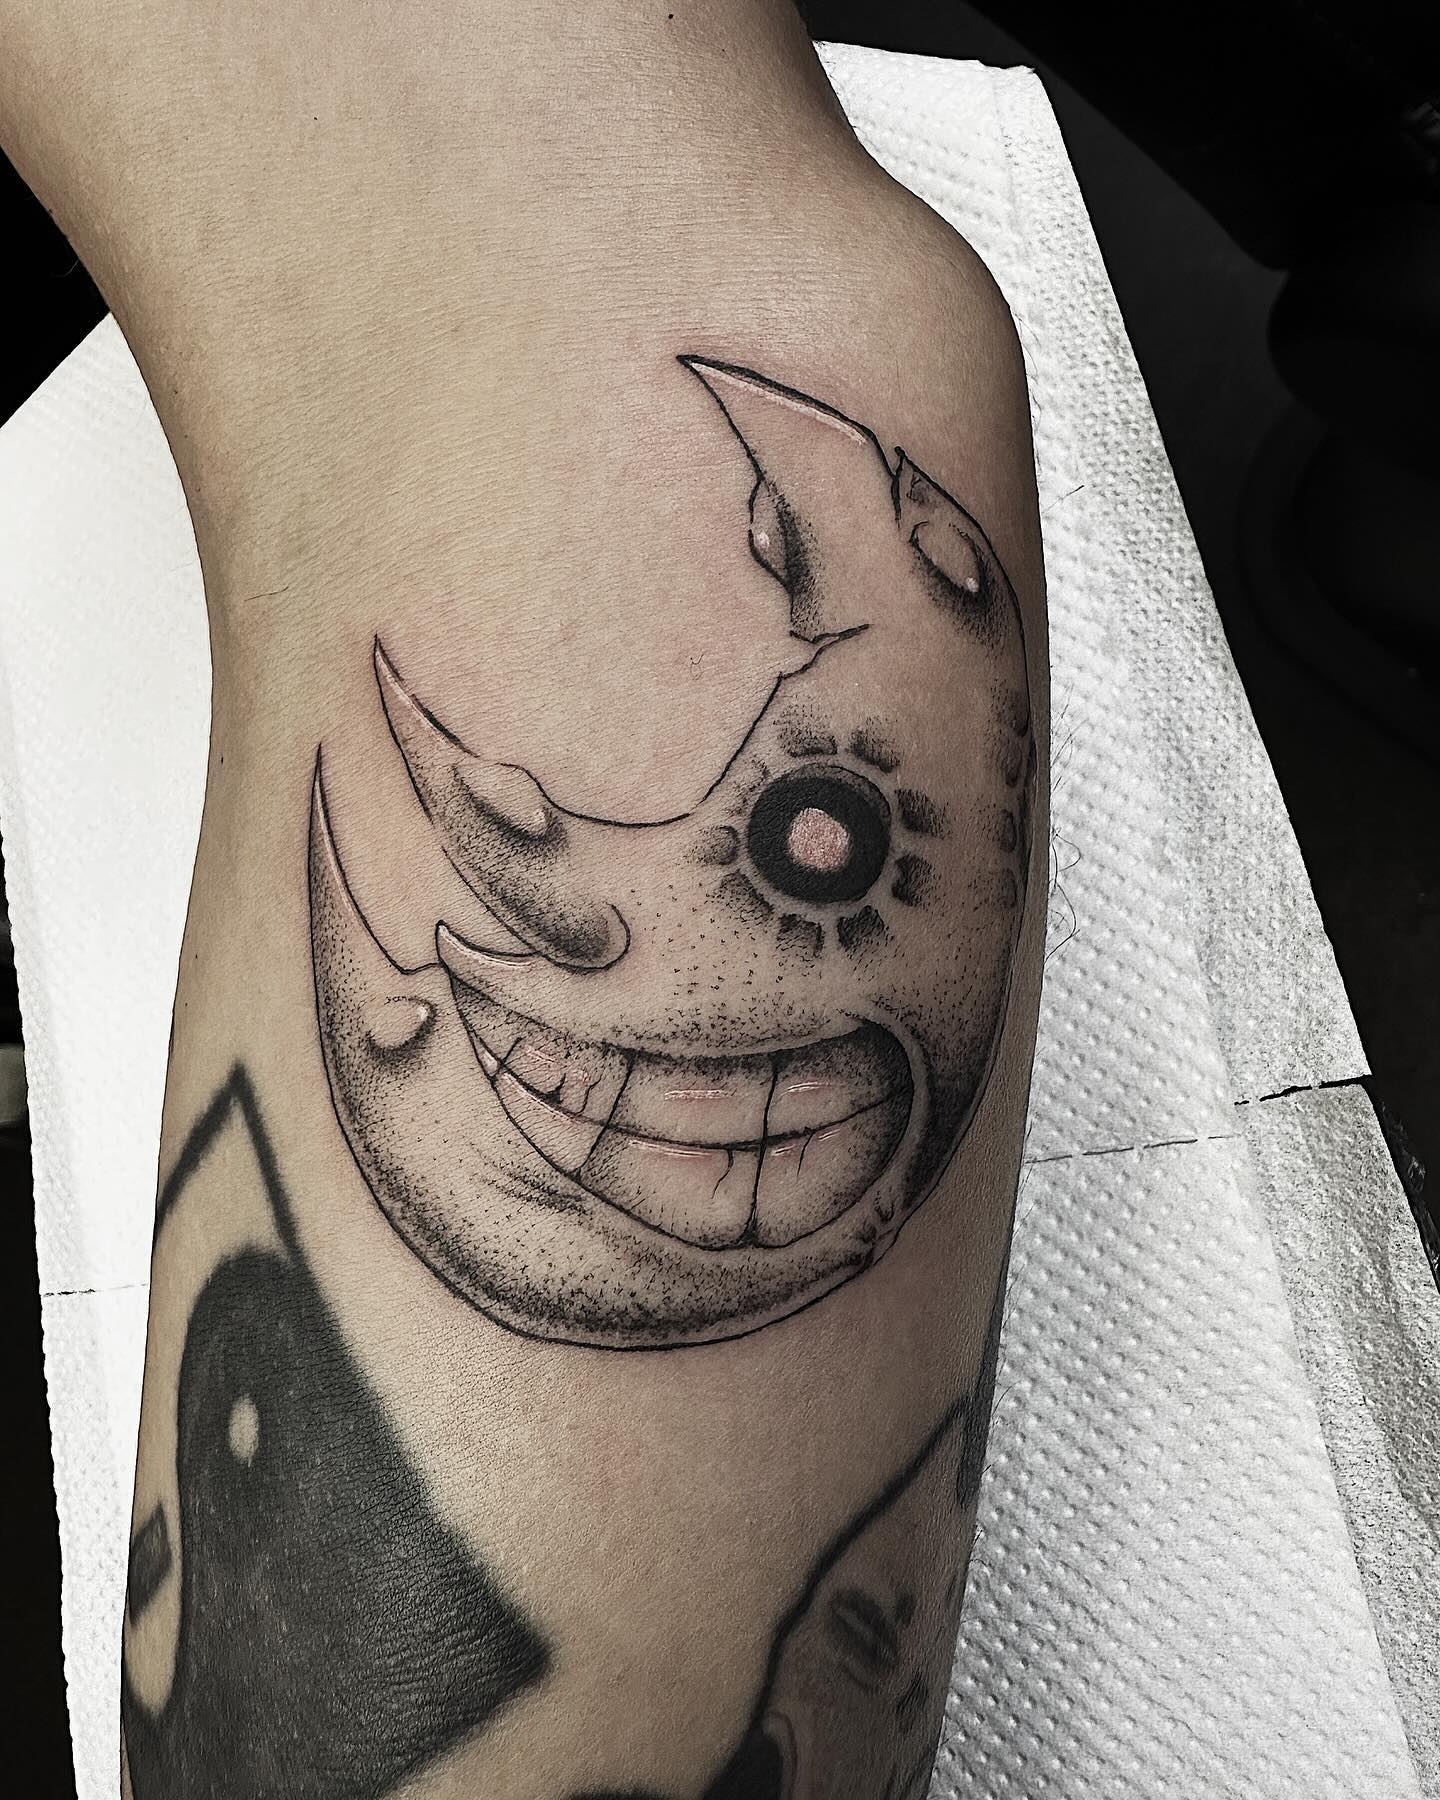 Soul Eater was the show that got me into anime back when I was 16, so of  course it had to me be my first tattoo! Done by @Ukiyo__nyc at Fun City